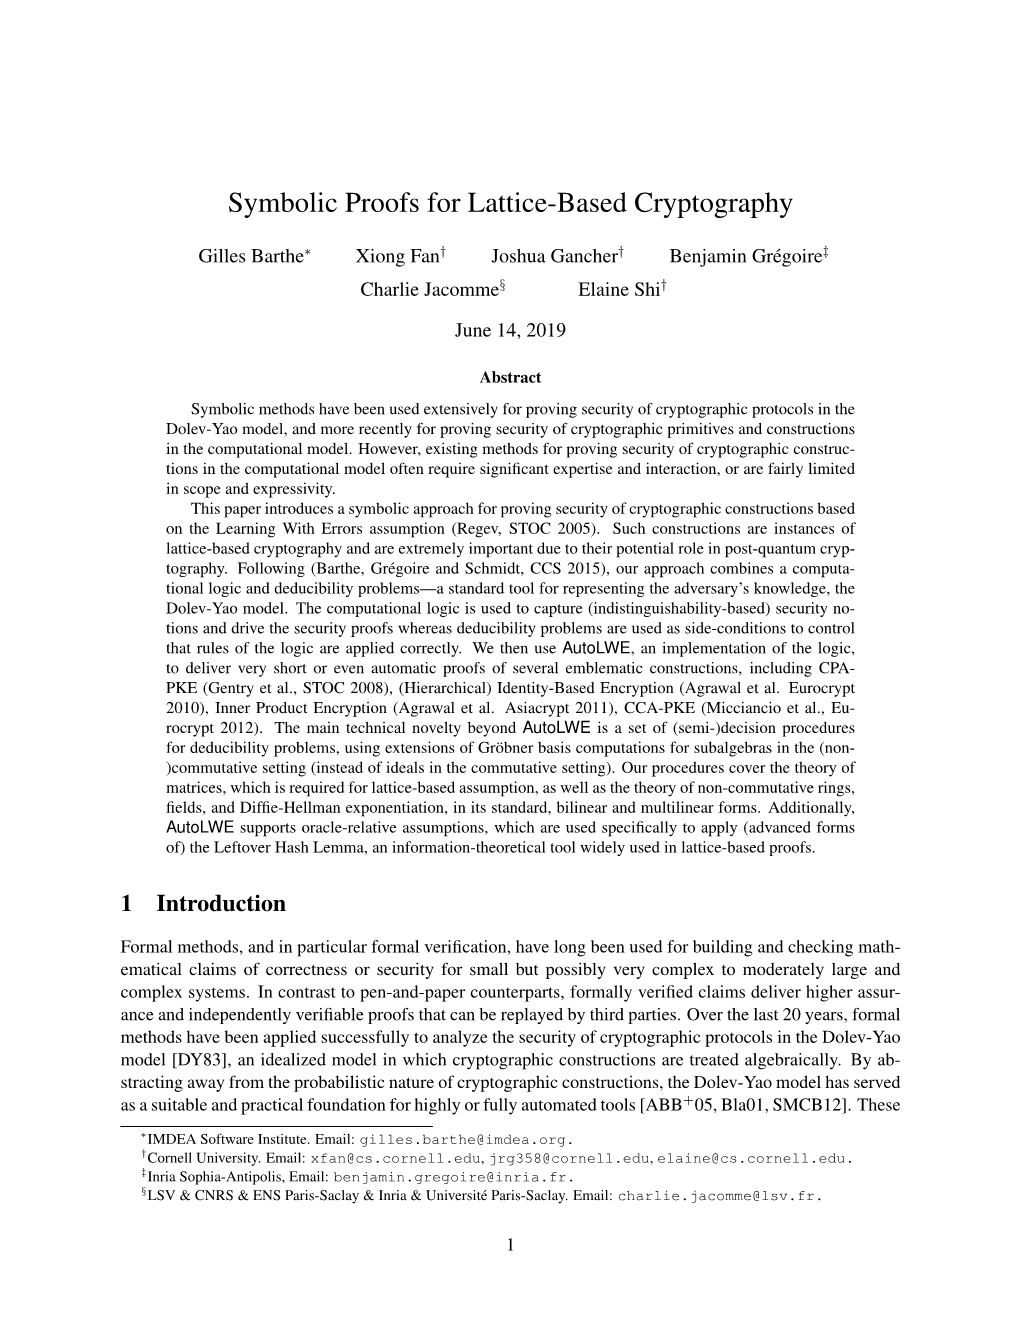 Symbolic Proofs for Lattice-Based Cryptography